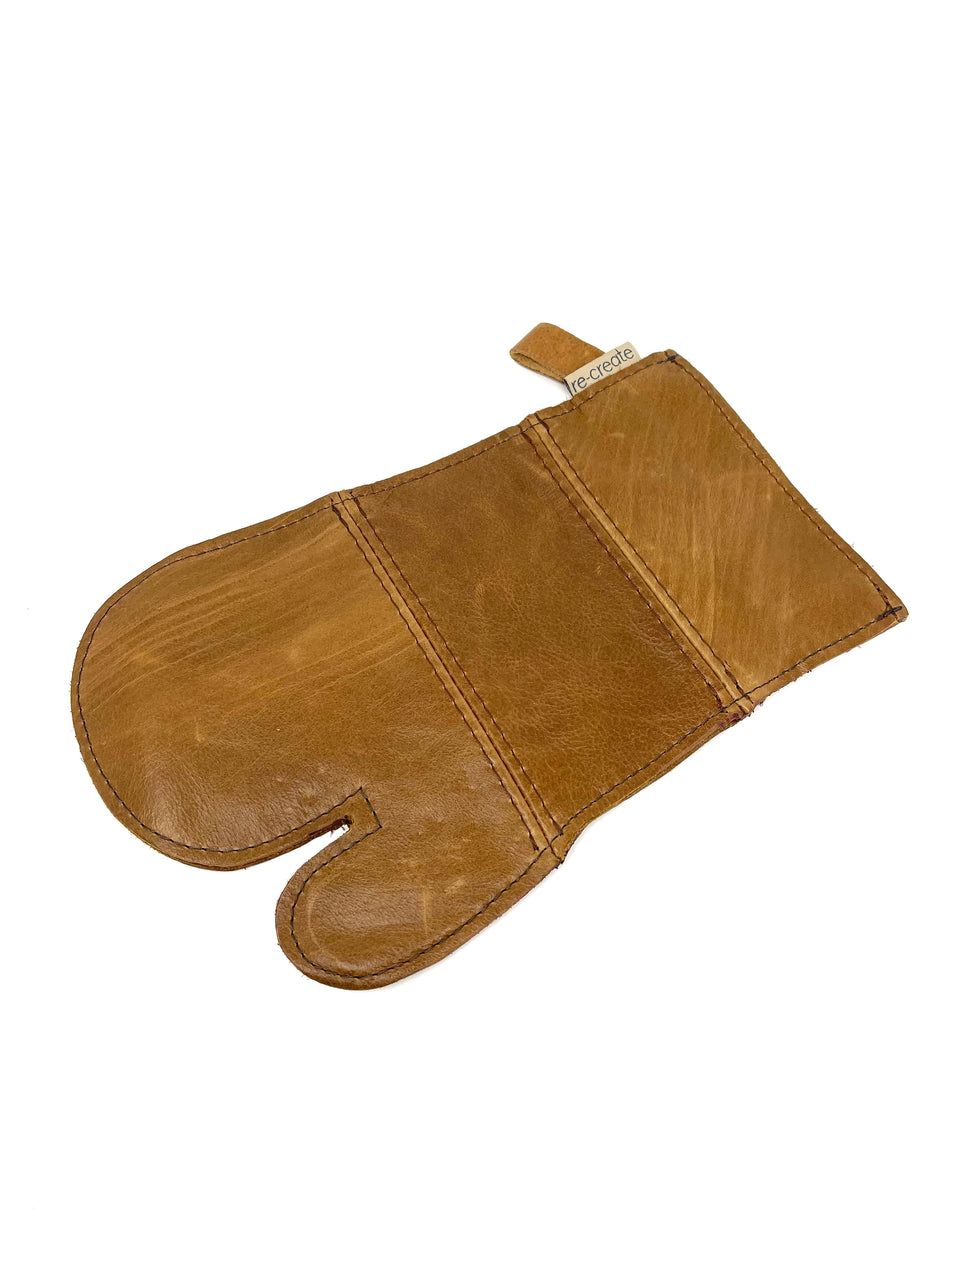 Leather Oven & Barbeque Mitt